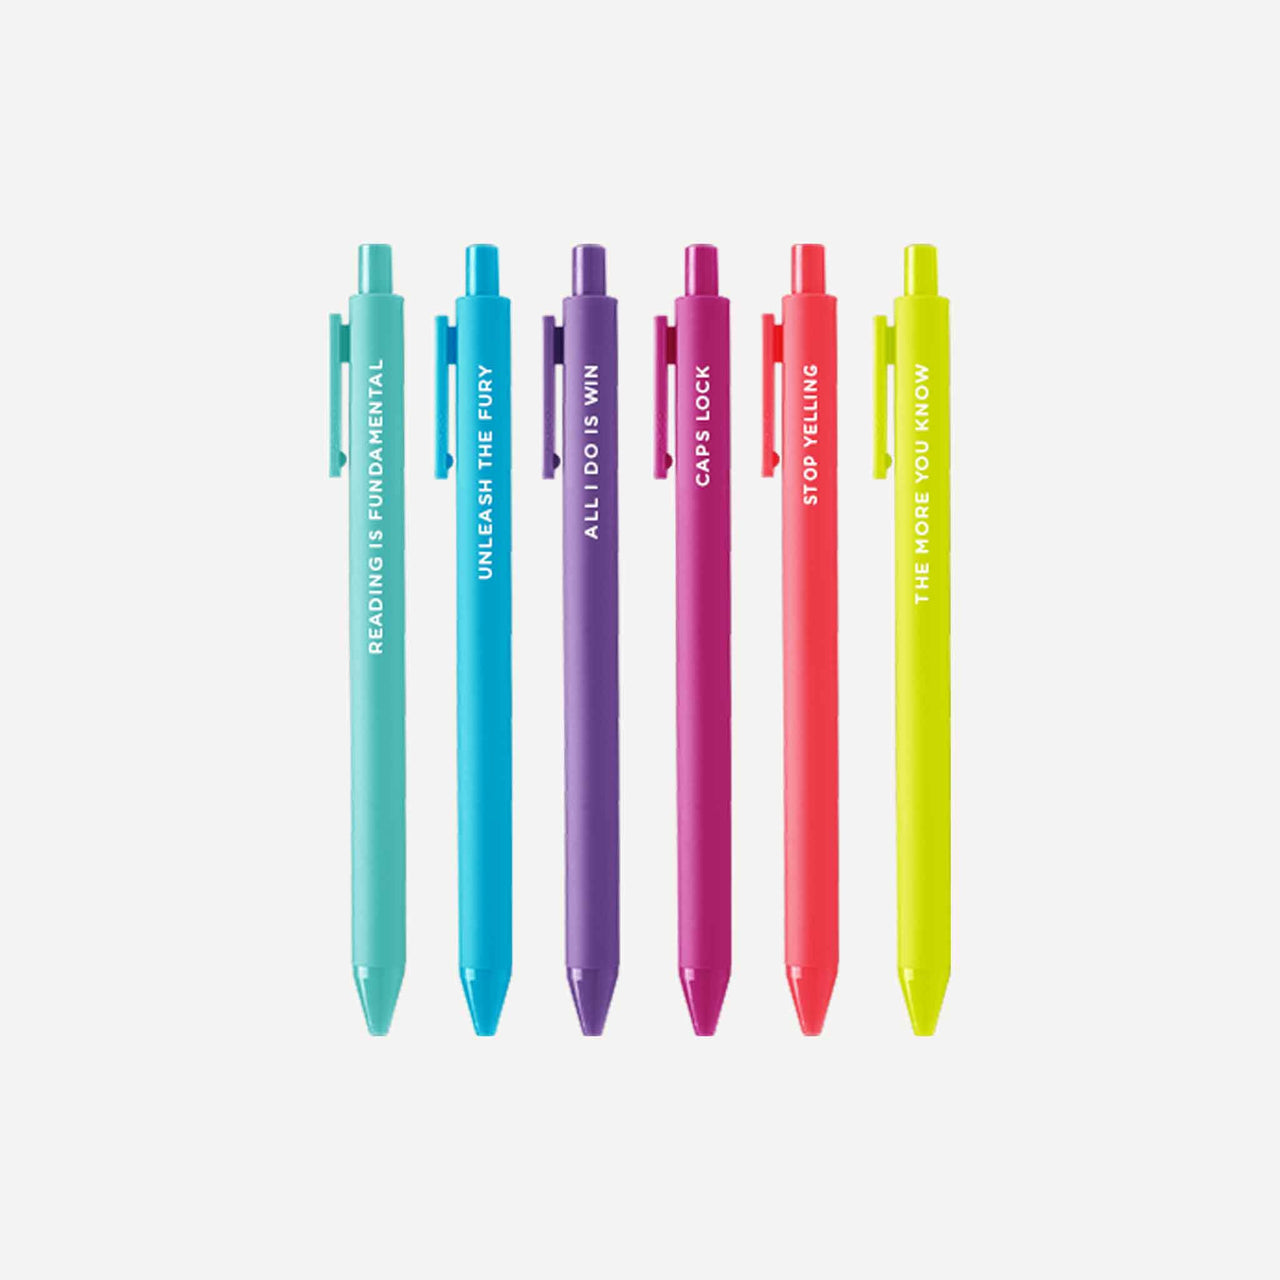 Jotter Gel Pens Pack of 6 by Talking Out of Turn - Mod Peach